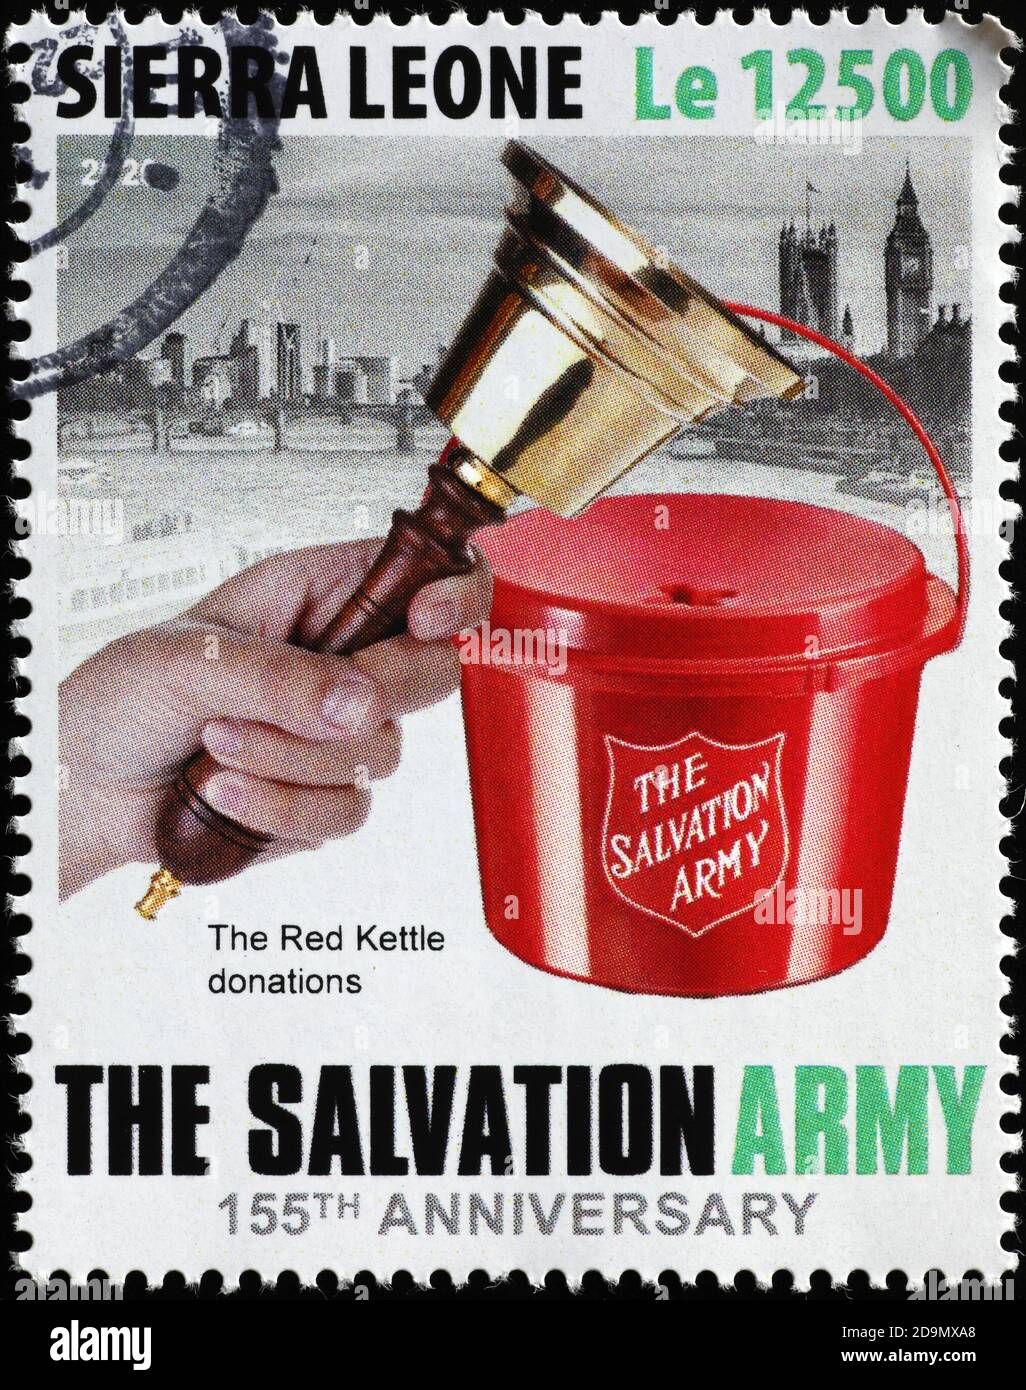 The red kettle donations to Salvation Army on stamp Stock Photo